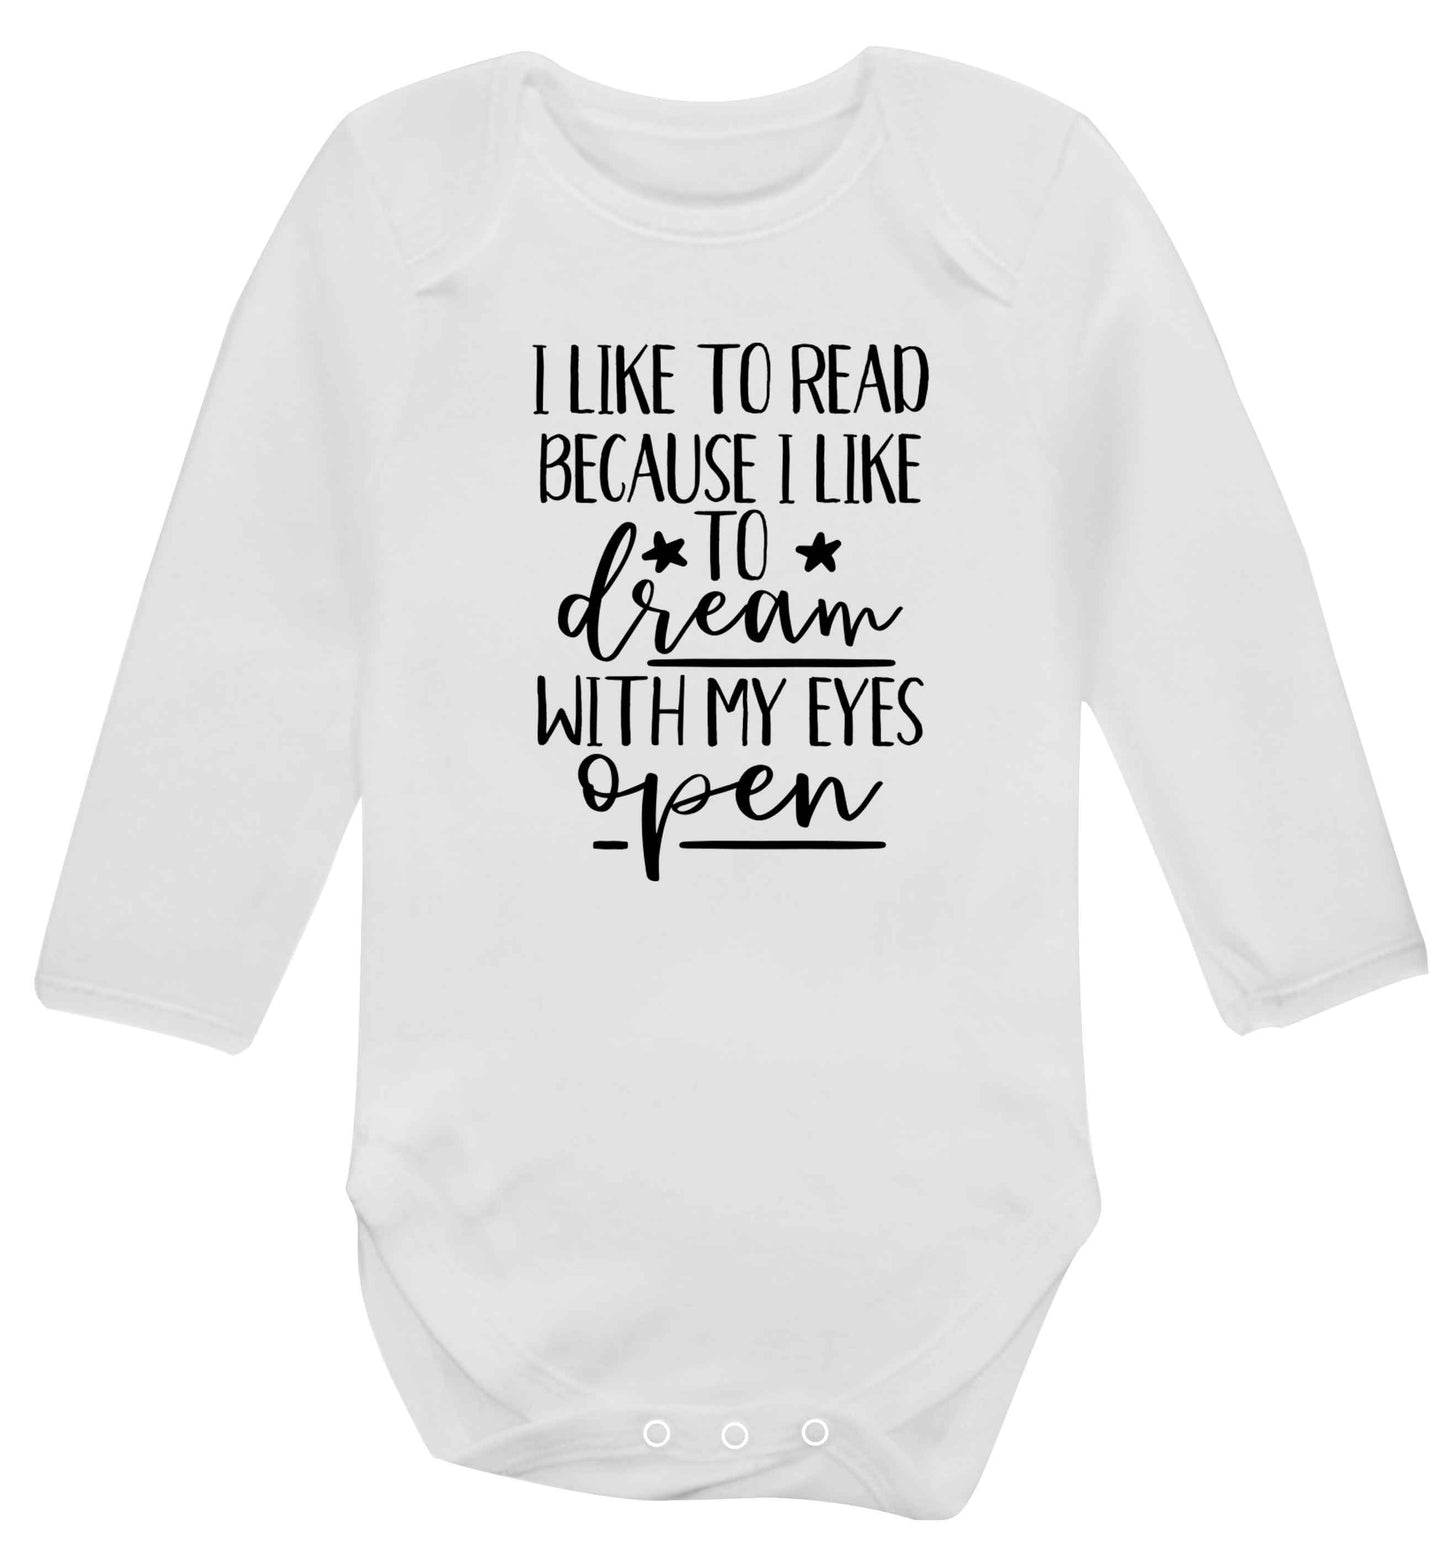 I like to read because I like to dream with my eyes open Baby Vest long sleeved white 6-12 months